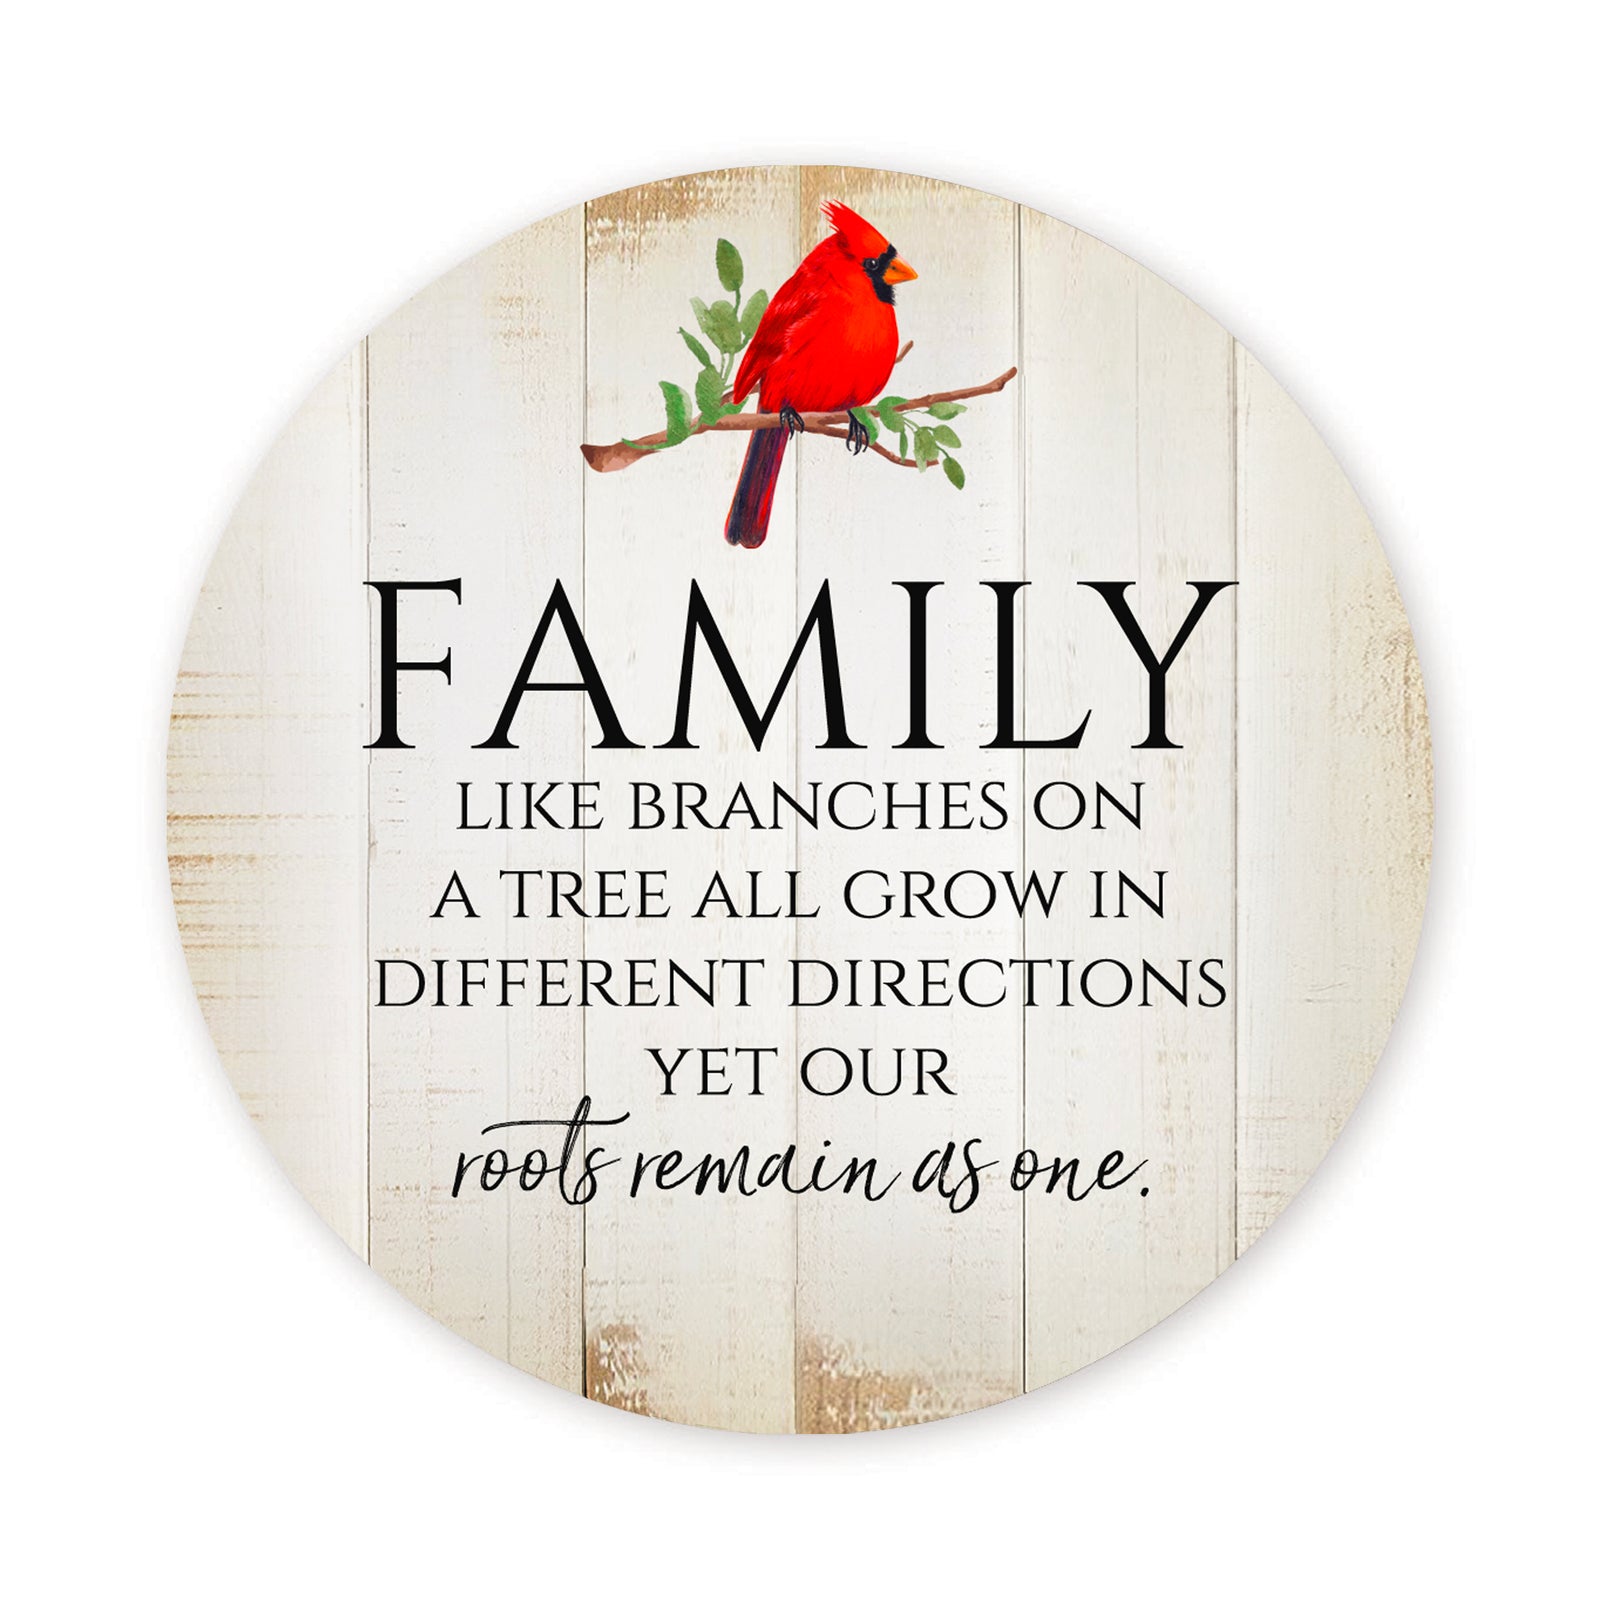 Vintage-Inspired Cardinal Wooden Magnet Printed With Everyday Inspirational Verses Gift Ideas - Family